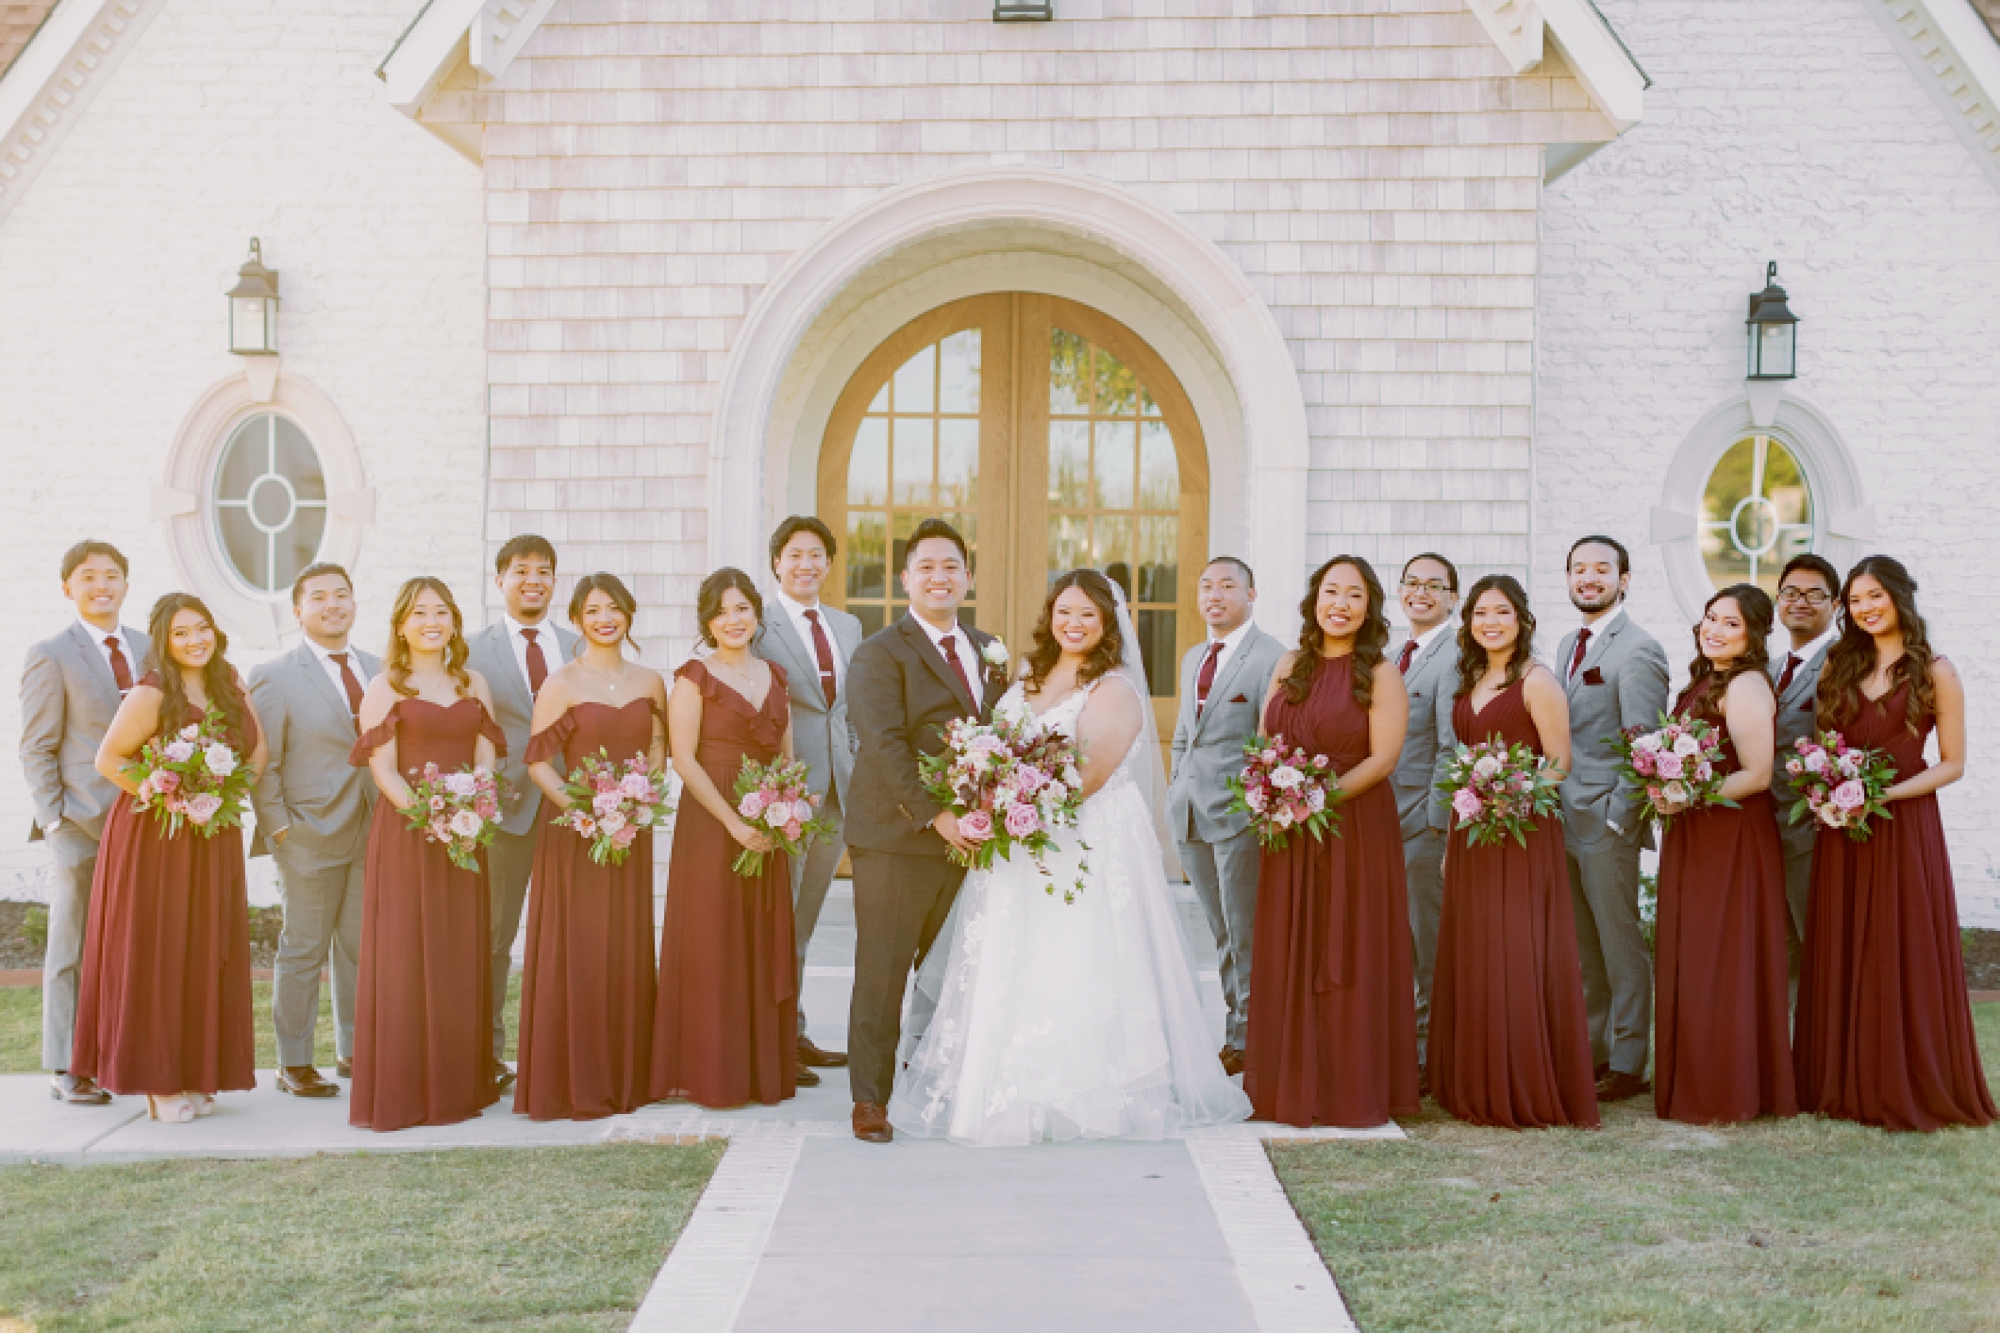 bride and groom pose with wedding party in burgundy gowns and grey suits 